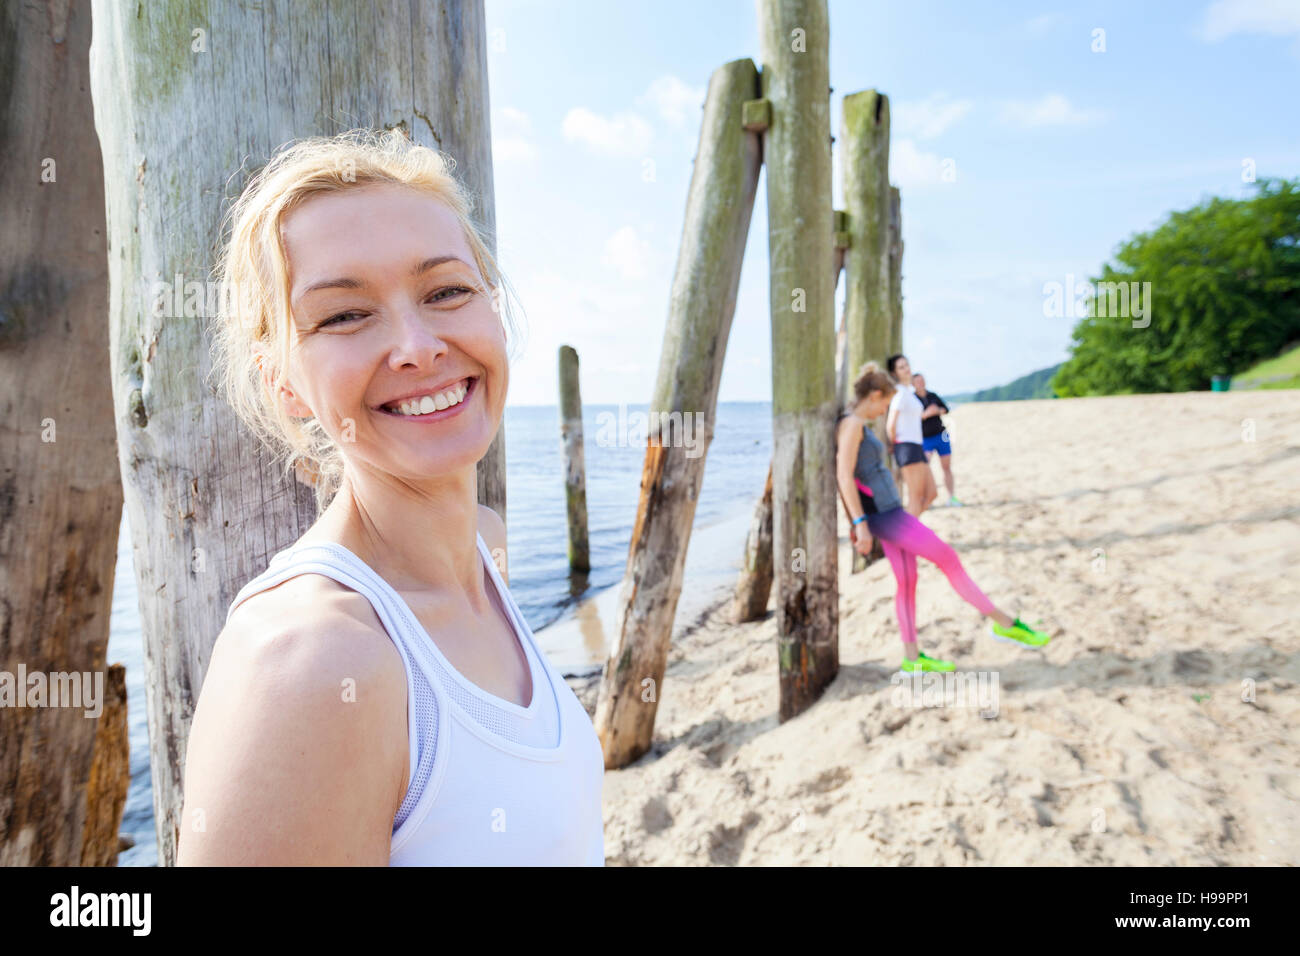 Young woman and friends on beach taking a break Stock Photo